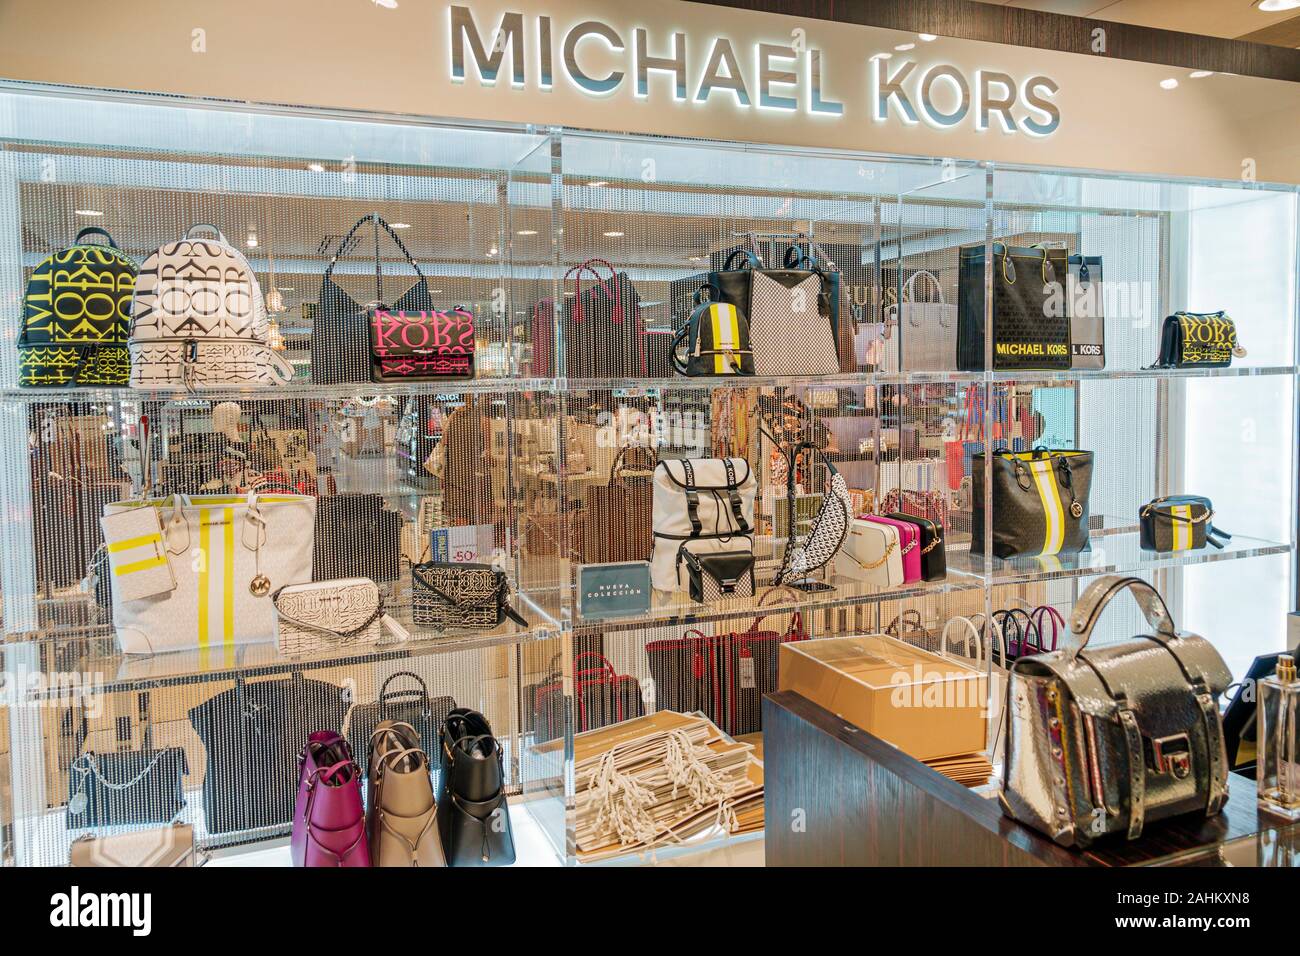 Michael kors store hi-res stock photography and images - Alamy